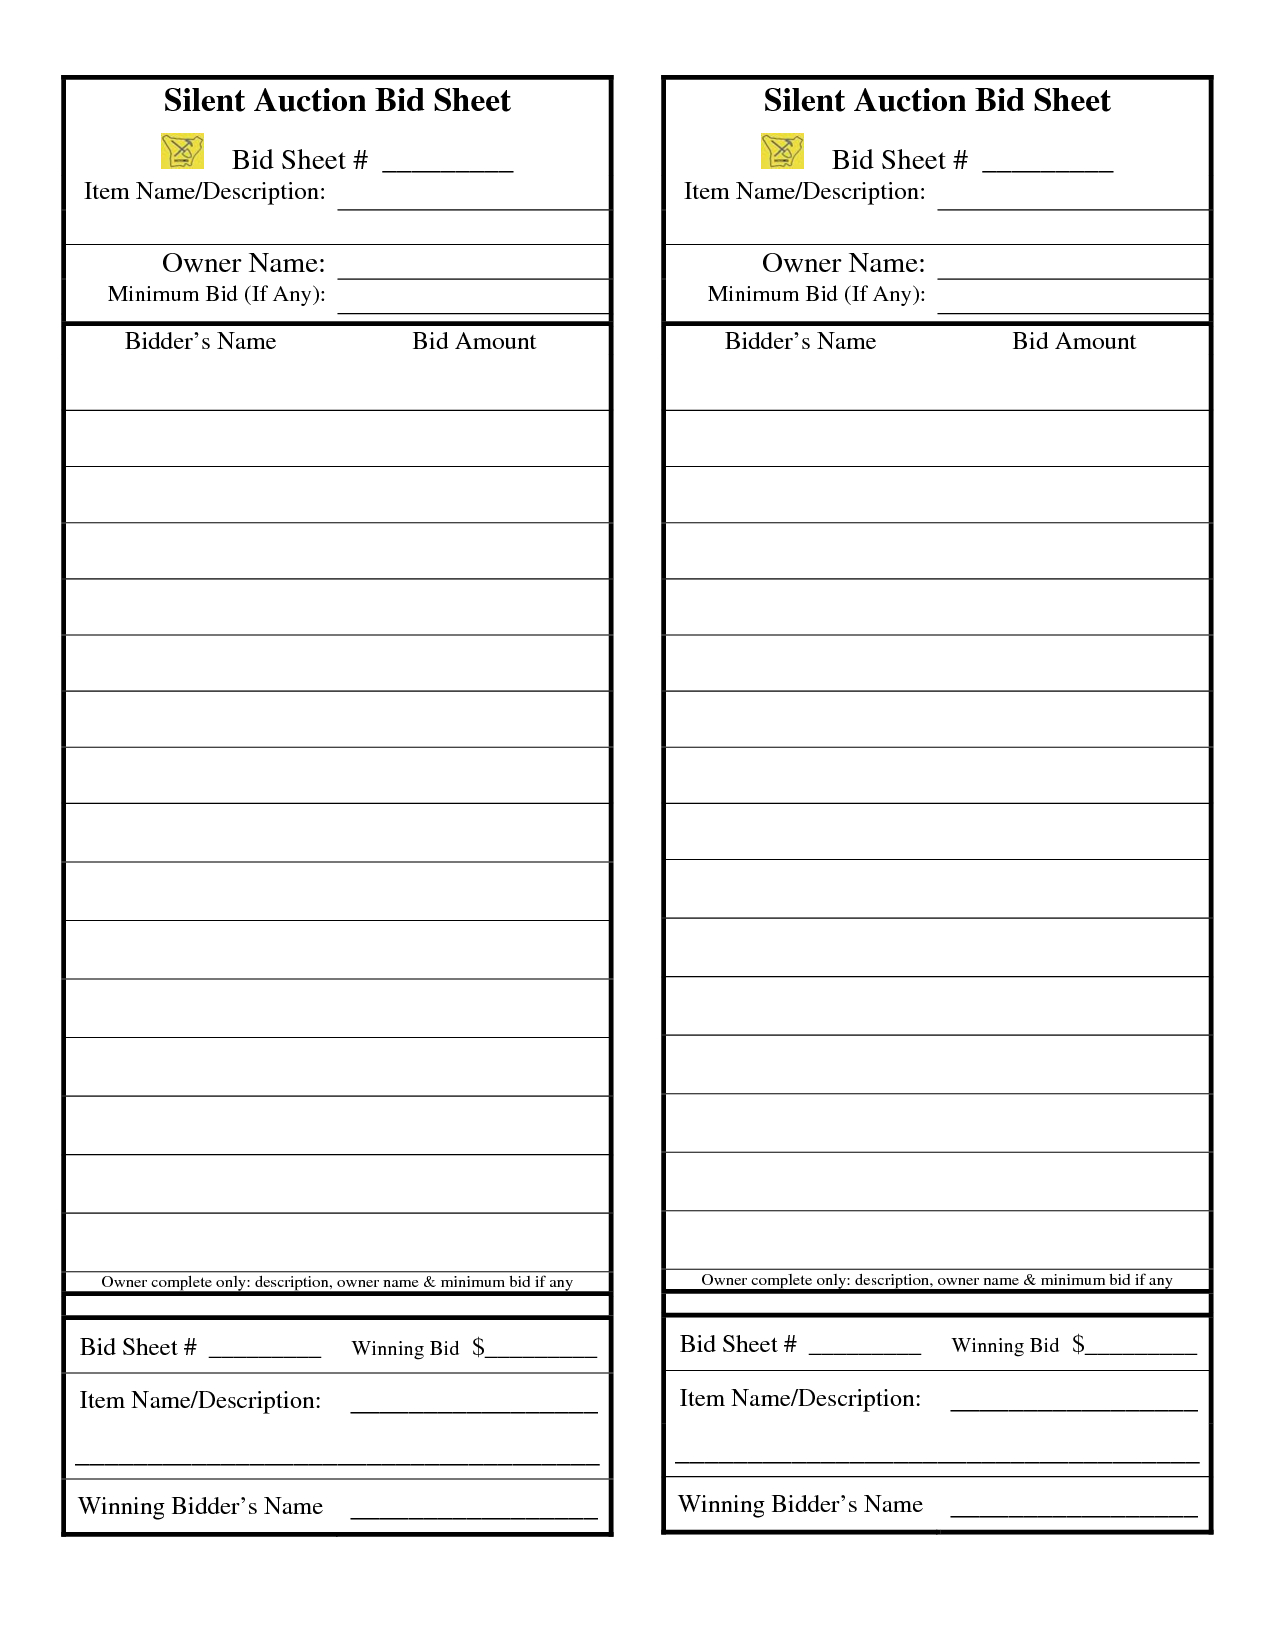 24 Awesome Sample Silent Auction Bid Sheet Images | Silent Auction - Free Printable Silent Auction Bid Sheets